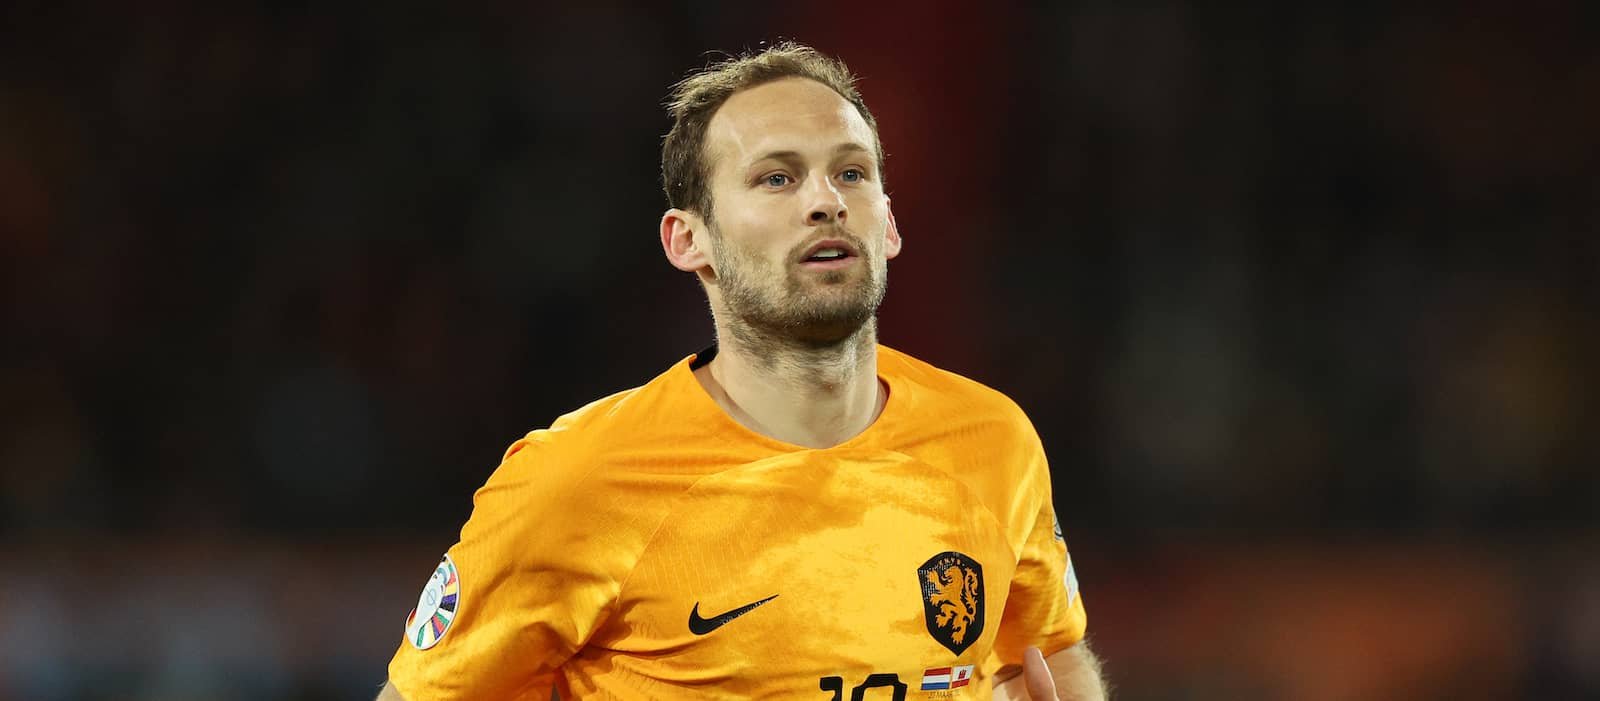 Former Manchester United defender Daley Blind hoping to “do a Leicester” with Girona – Man United News And Transfer News